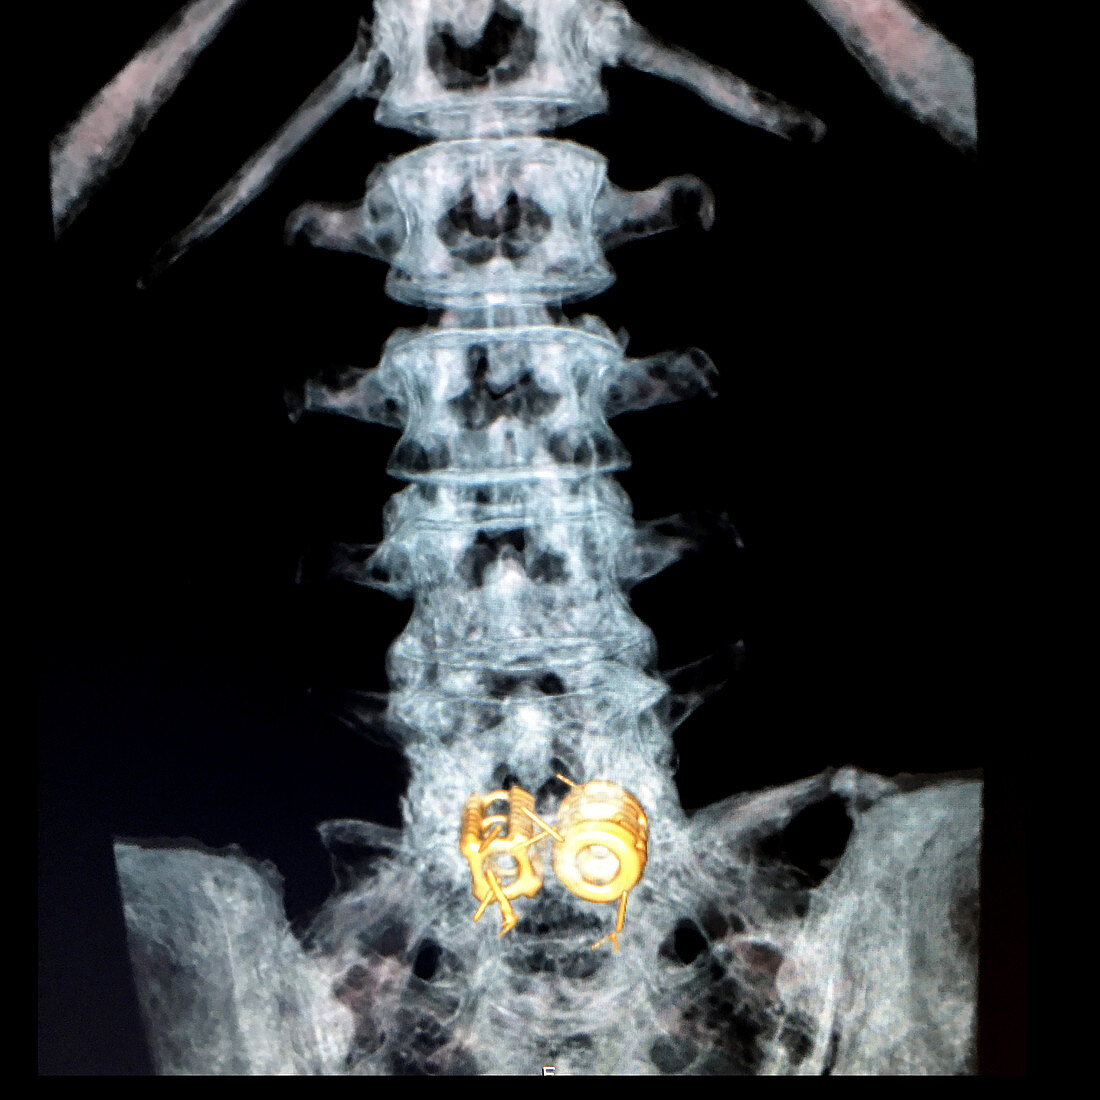 Lumbar Spine with Fusion Cages, 3D CT